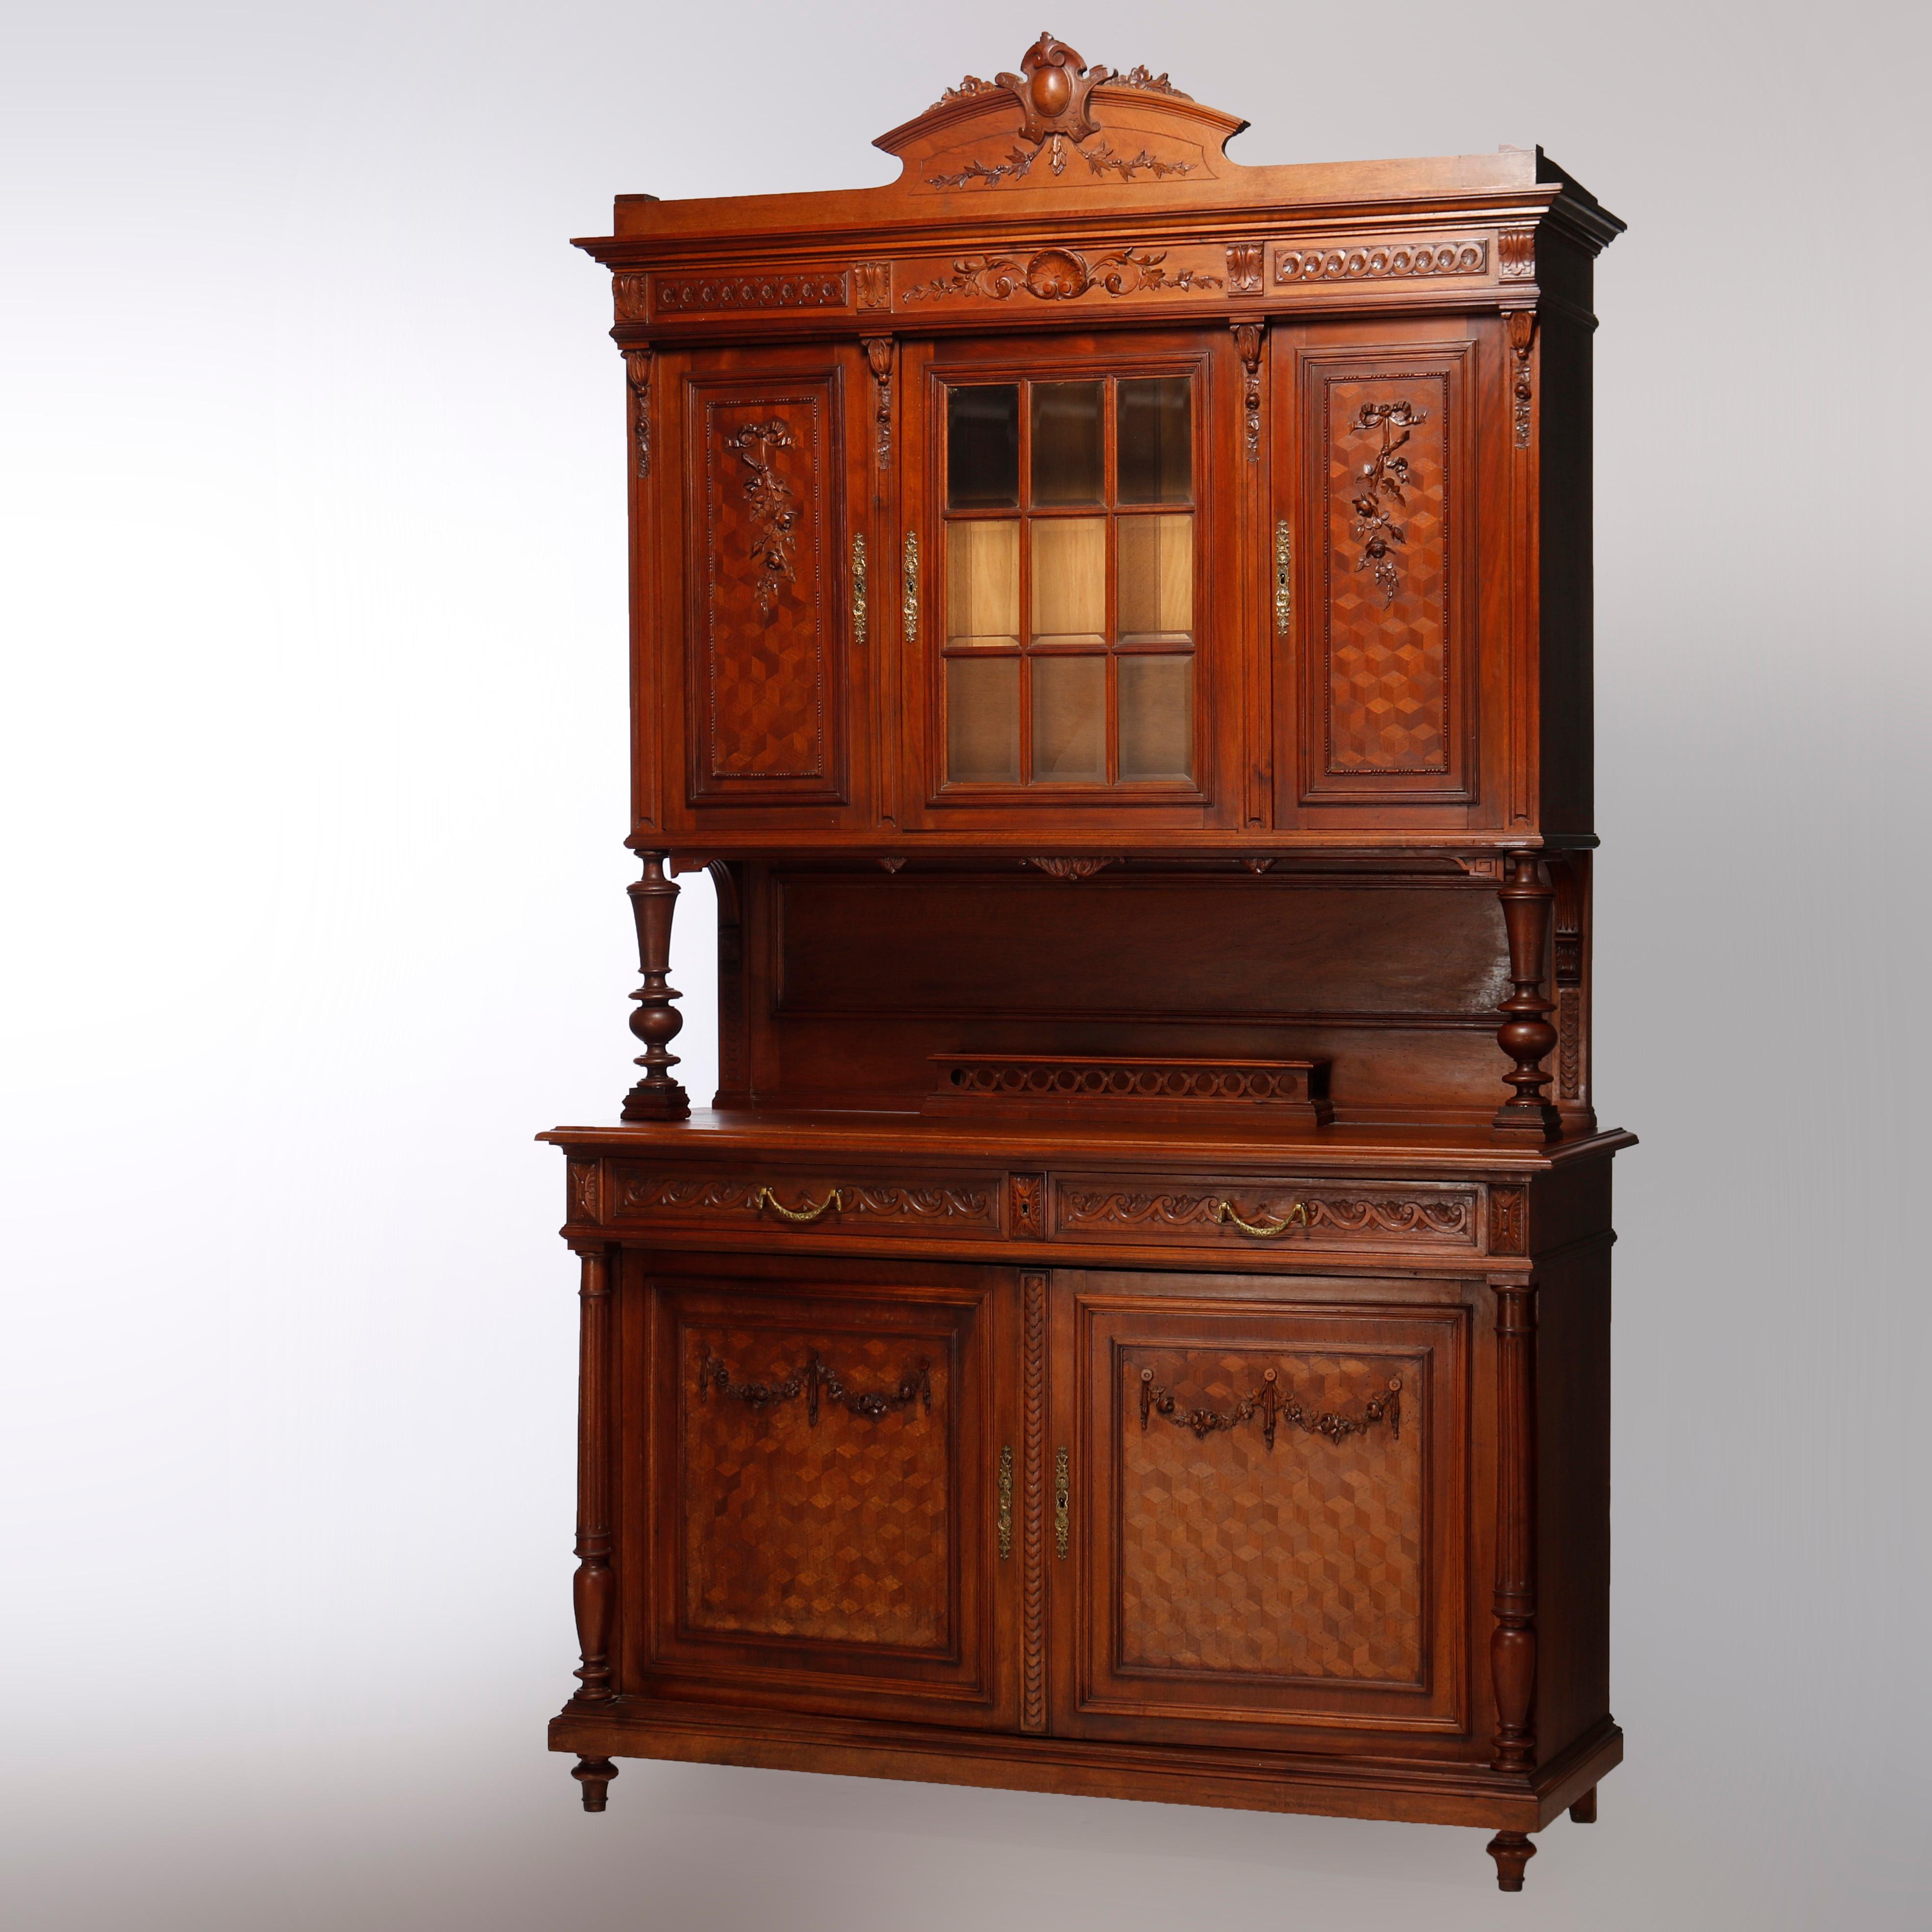 An antique French Renaissance court cupboard offers walnut construction with crest having central carved cartouche and flanking foliate elements over upper cabinet with central glass door with flaking parquetry blind doors with foliate mounts over